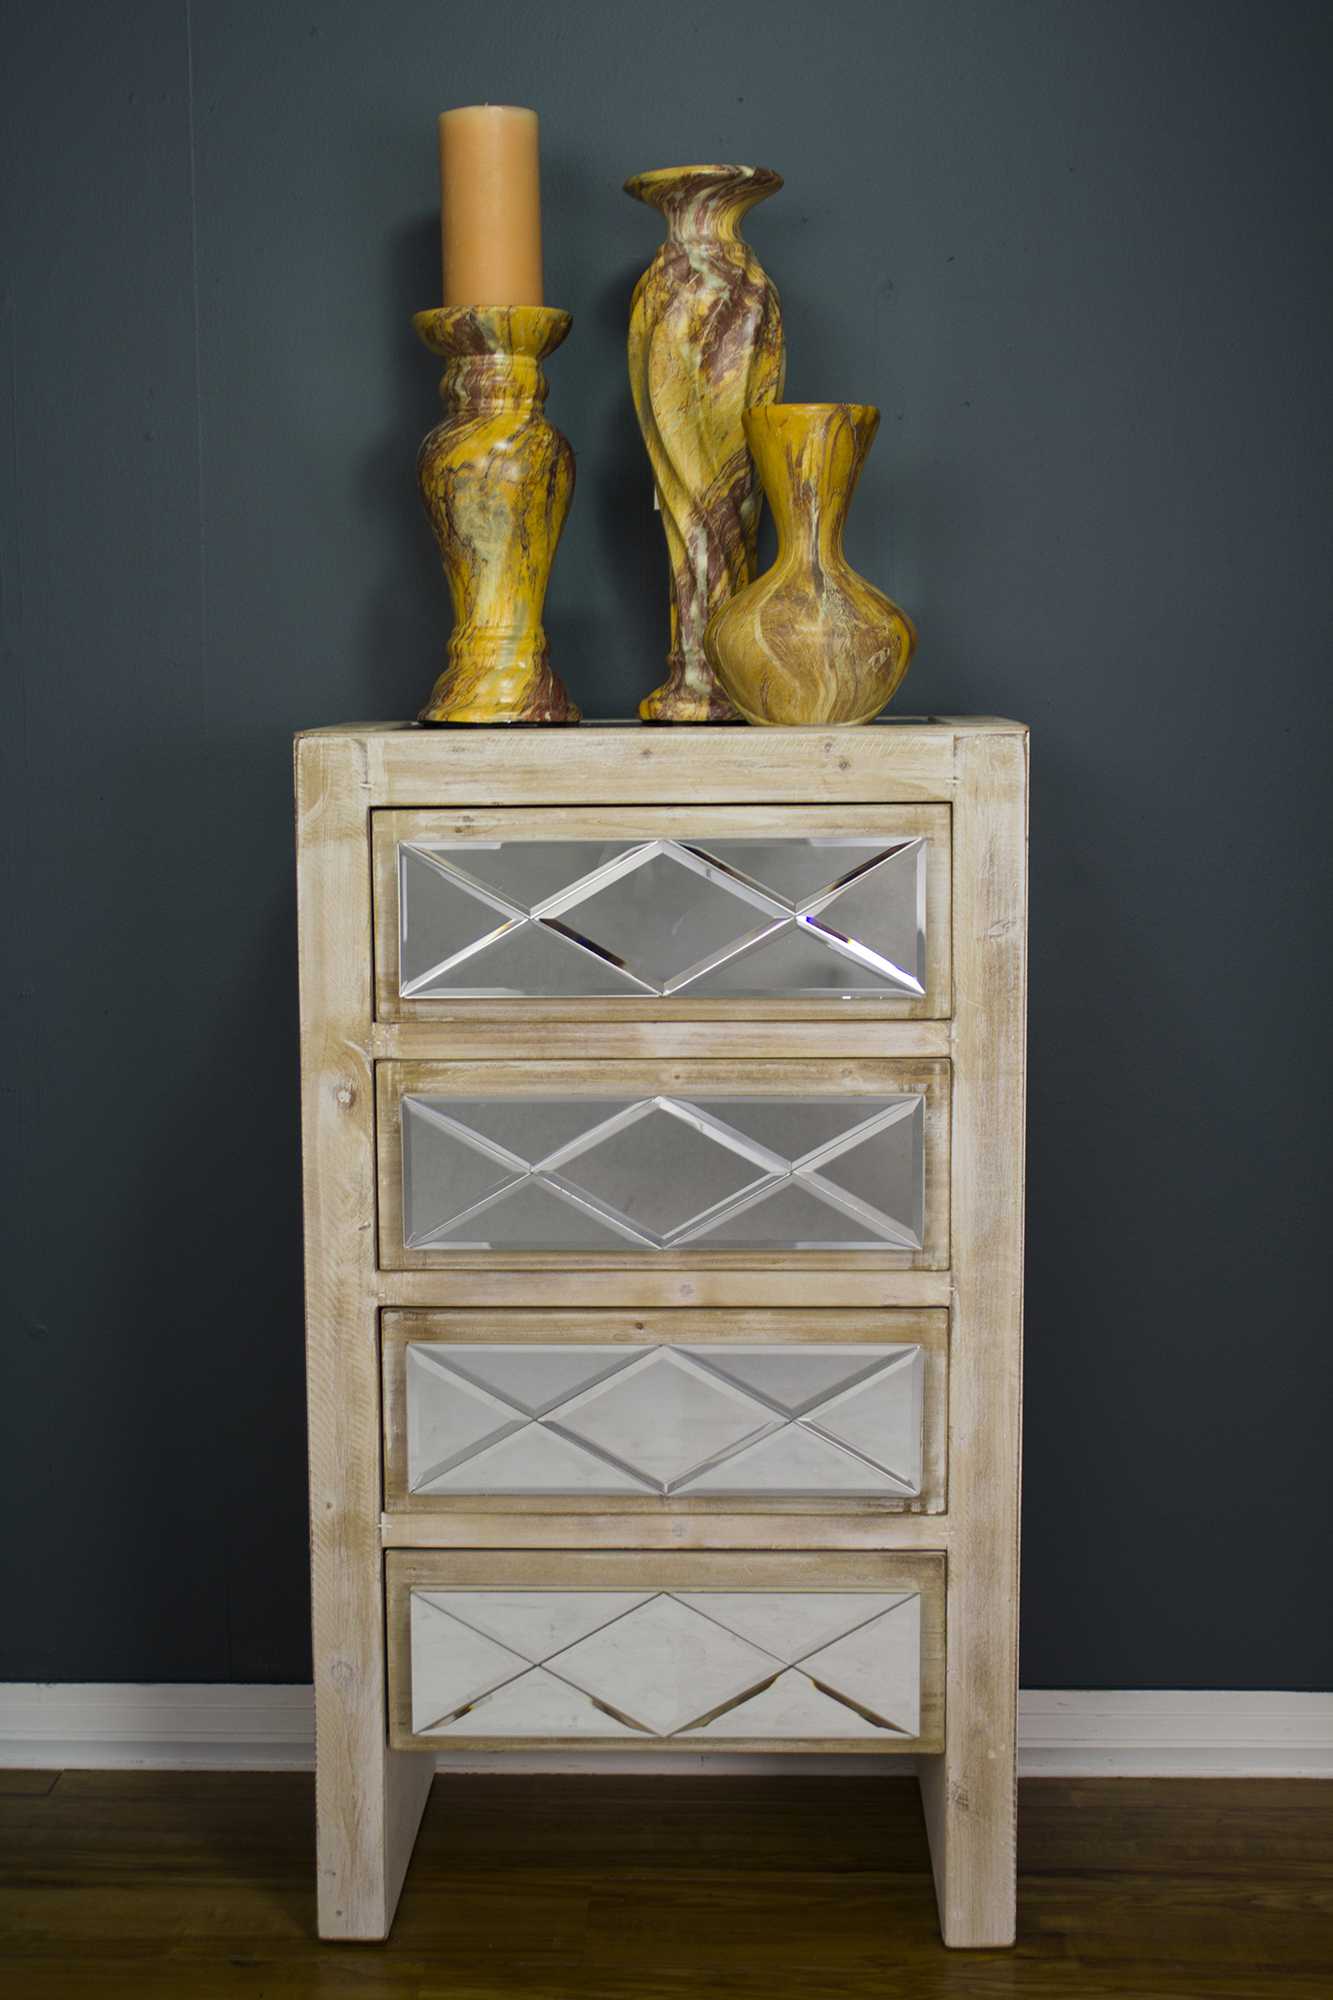 19.6" X 13.8" X 34.25" White Washed MDF Wood Mirrored Glass Accent Cabinet with Drawers and Mirrored Glass